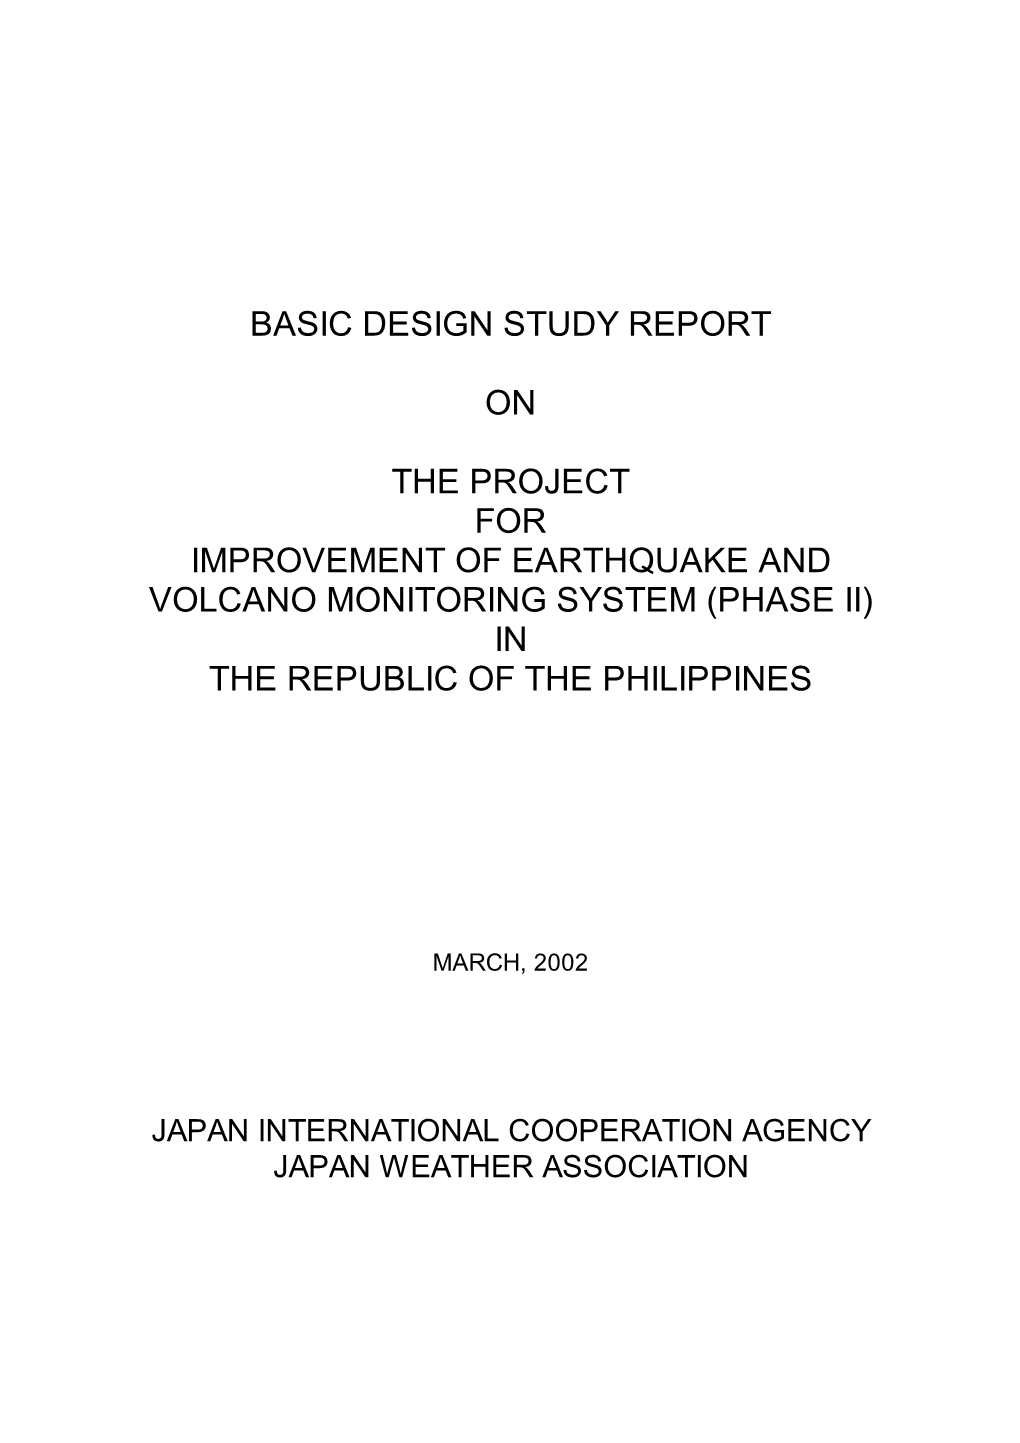 Basic Design Study Report on the Project for Improvement of Earthquake and Volcano Monitoring System (Phase II) in the Republic of the Philippines